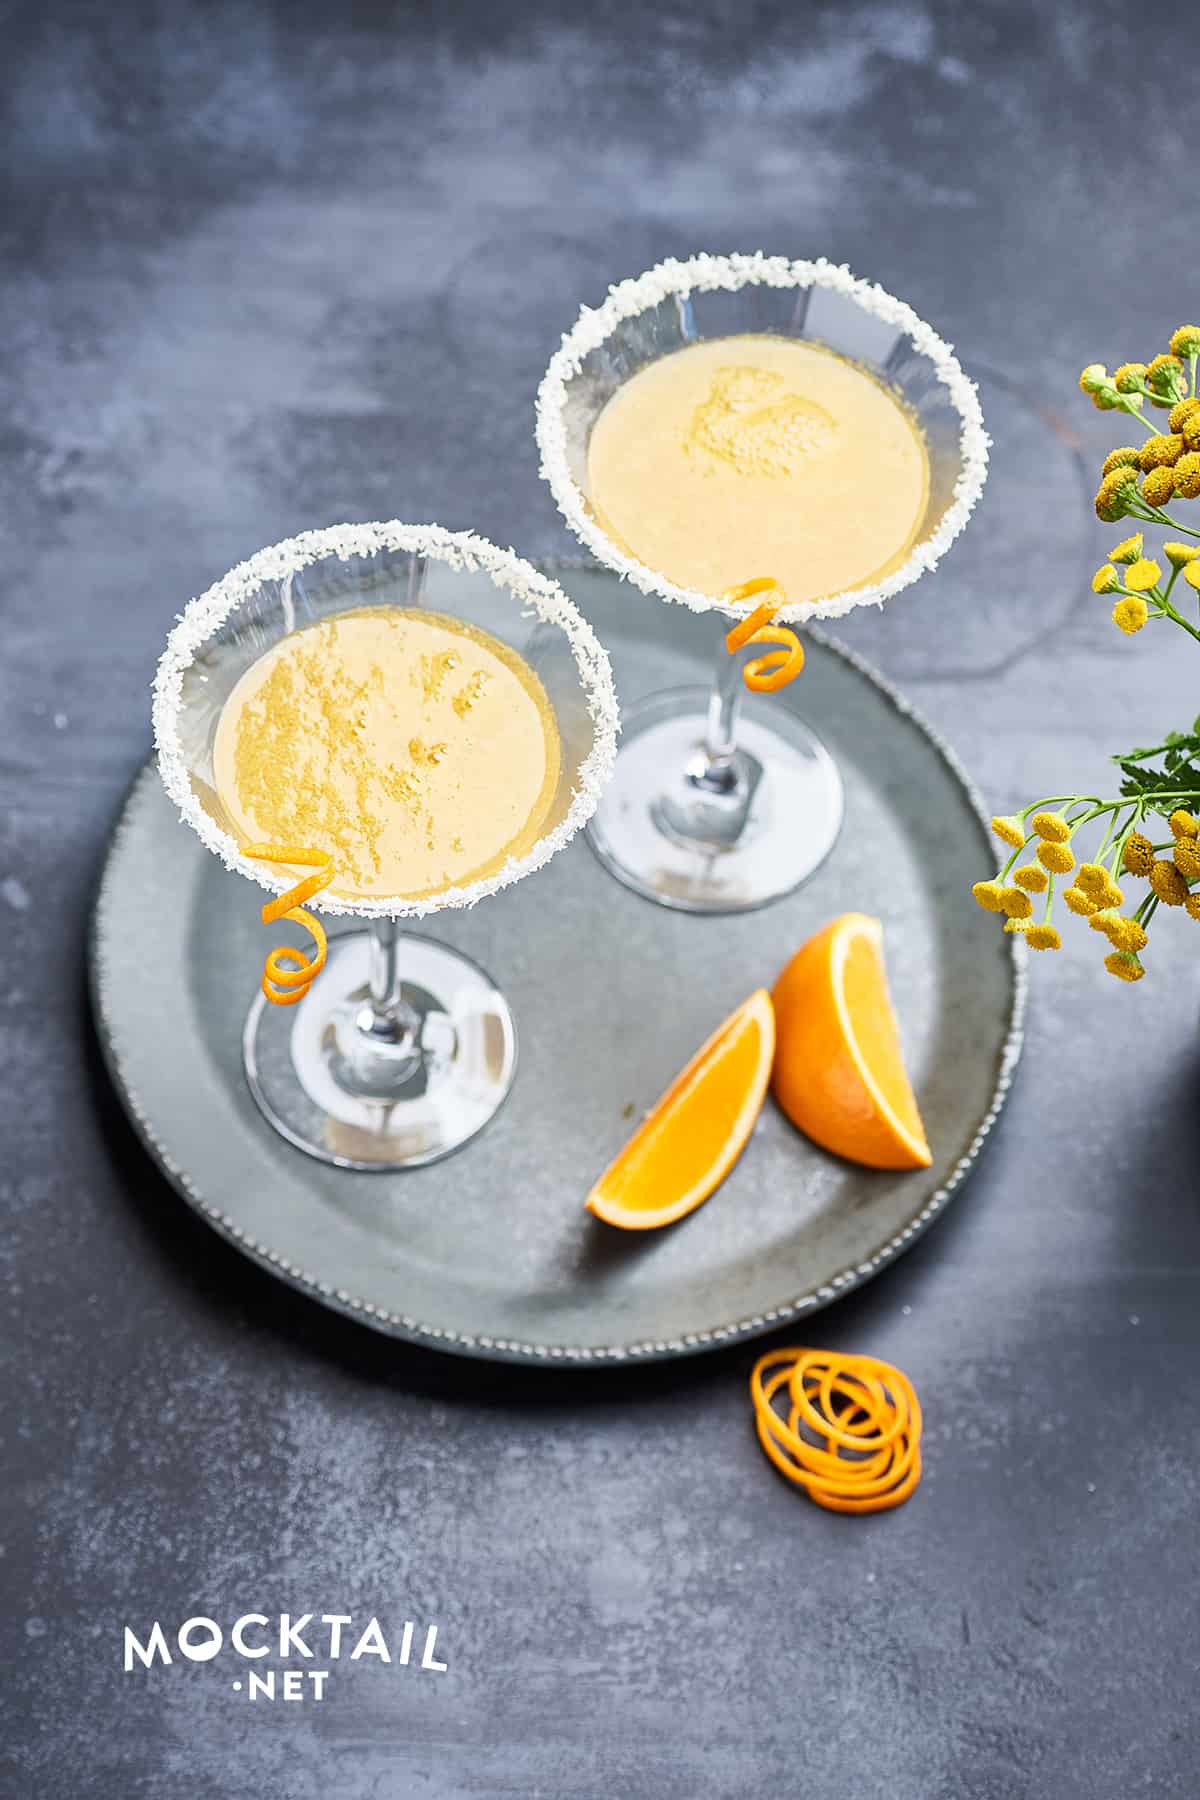 How to Make a Ginger Ale Mimosa Mocktail